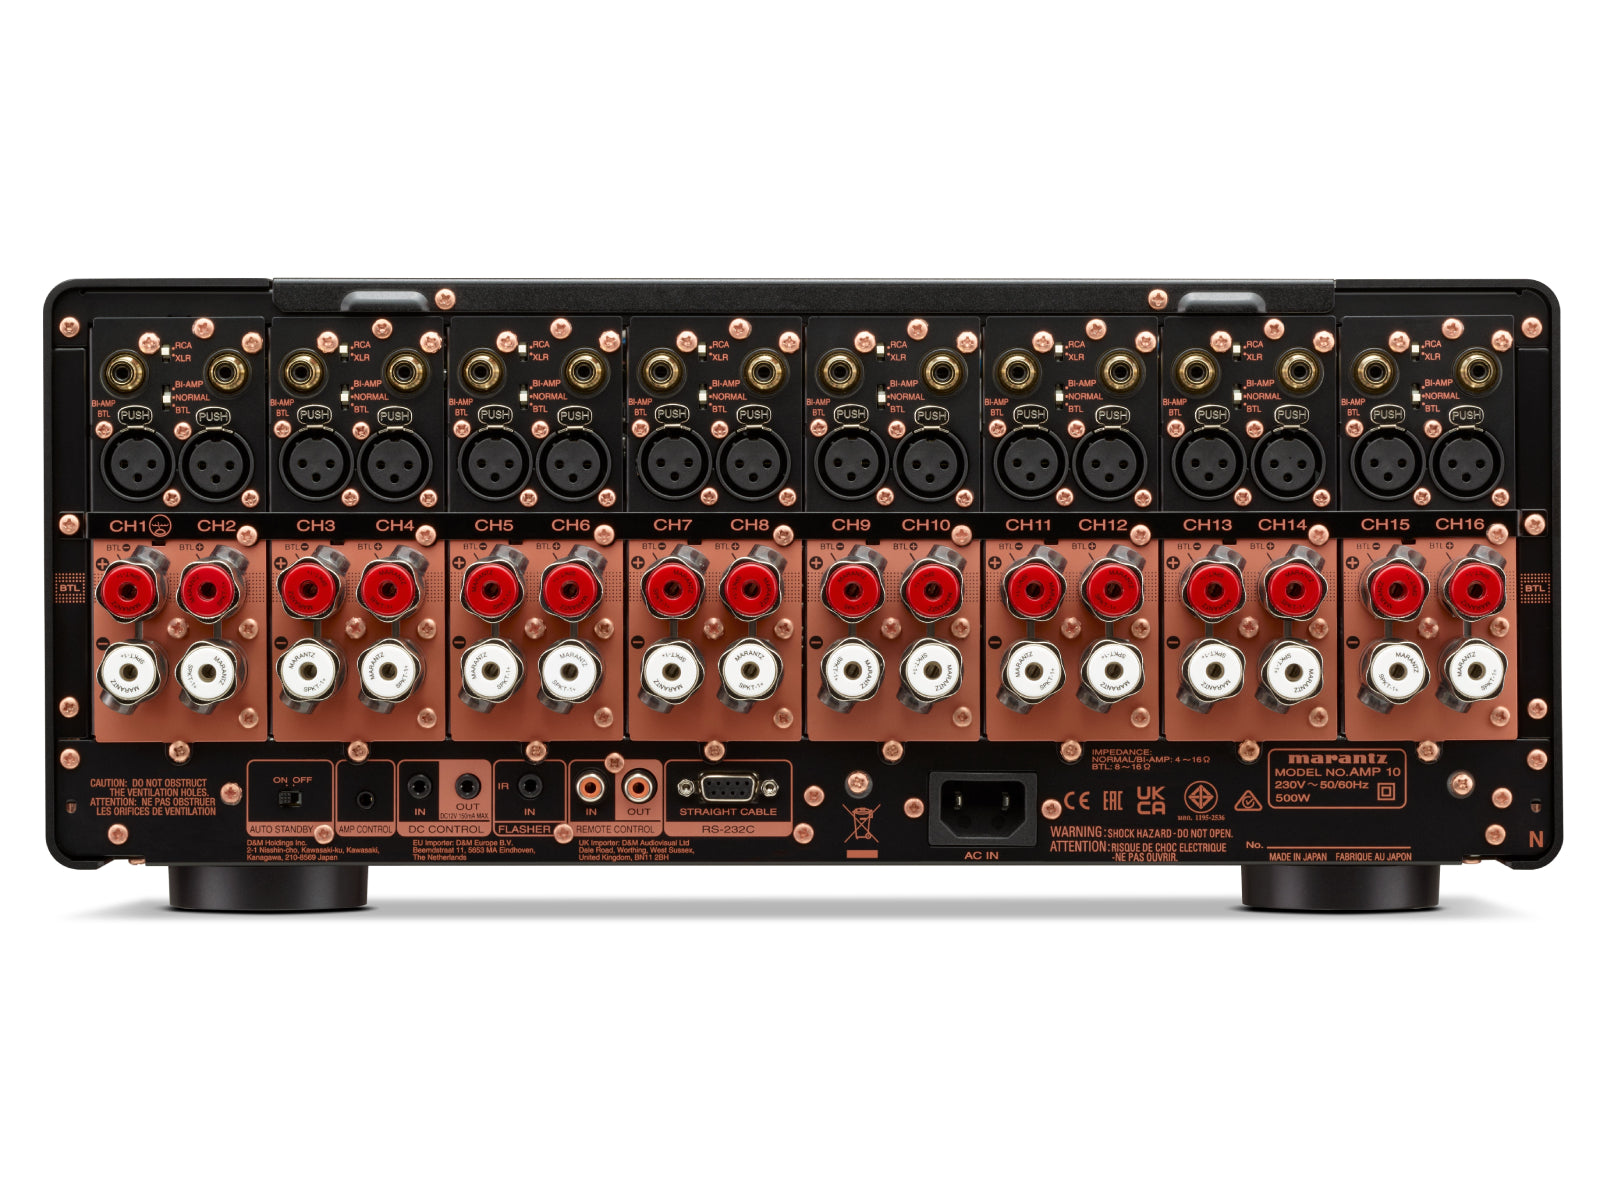 Marantz AMP 10 Reference 16 channel Power Amplifier Back View